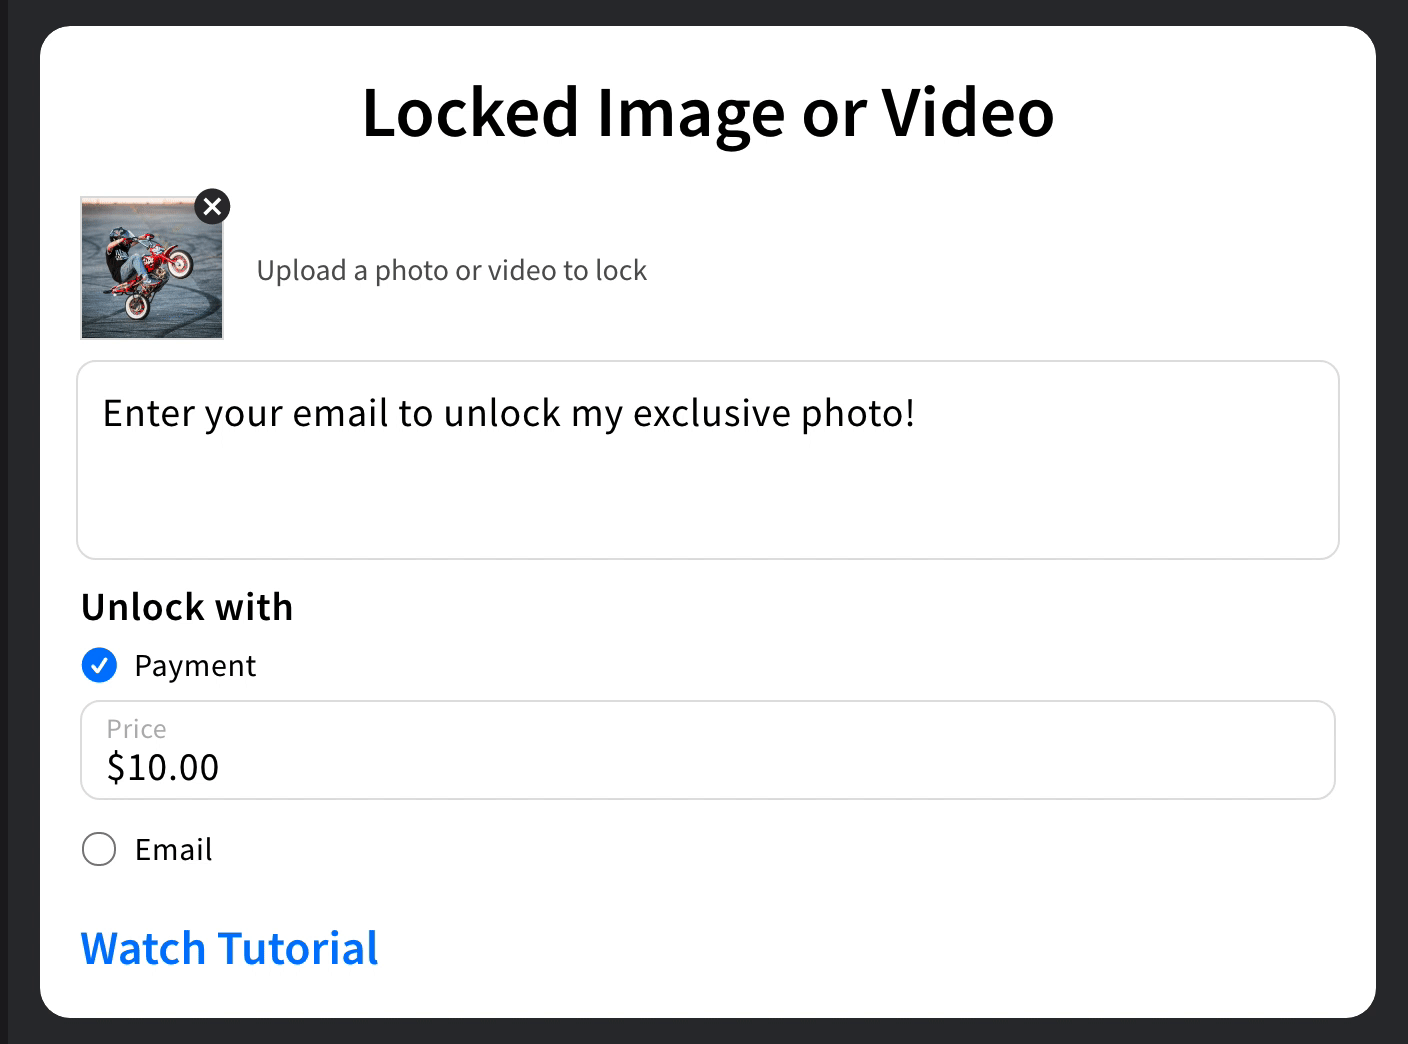 offer followers an exclusive photo to unlock in exchange for their email